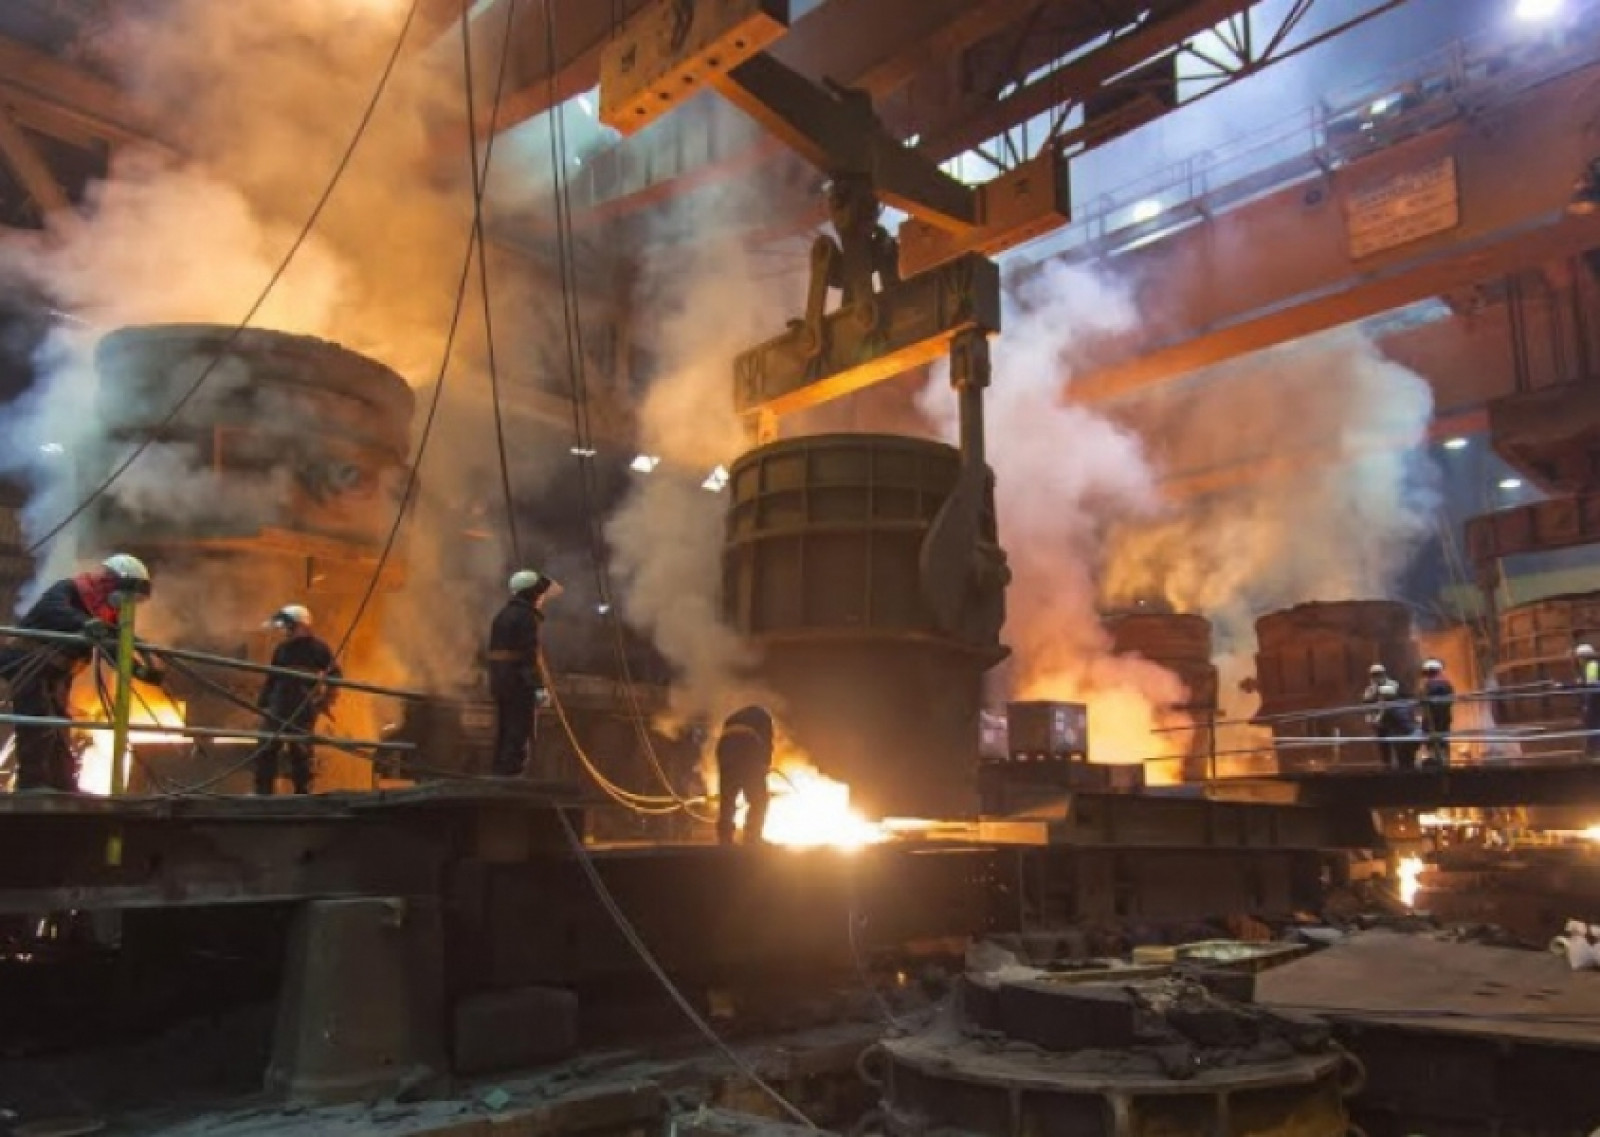 Record-breaking pour for Sheffield steel firm